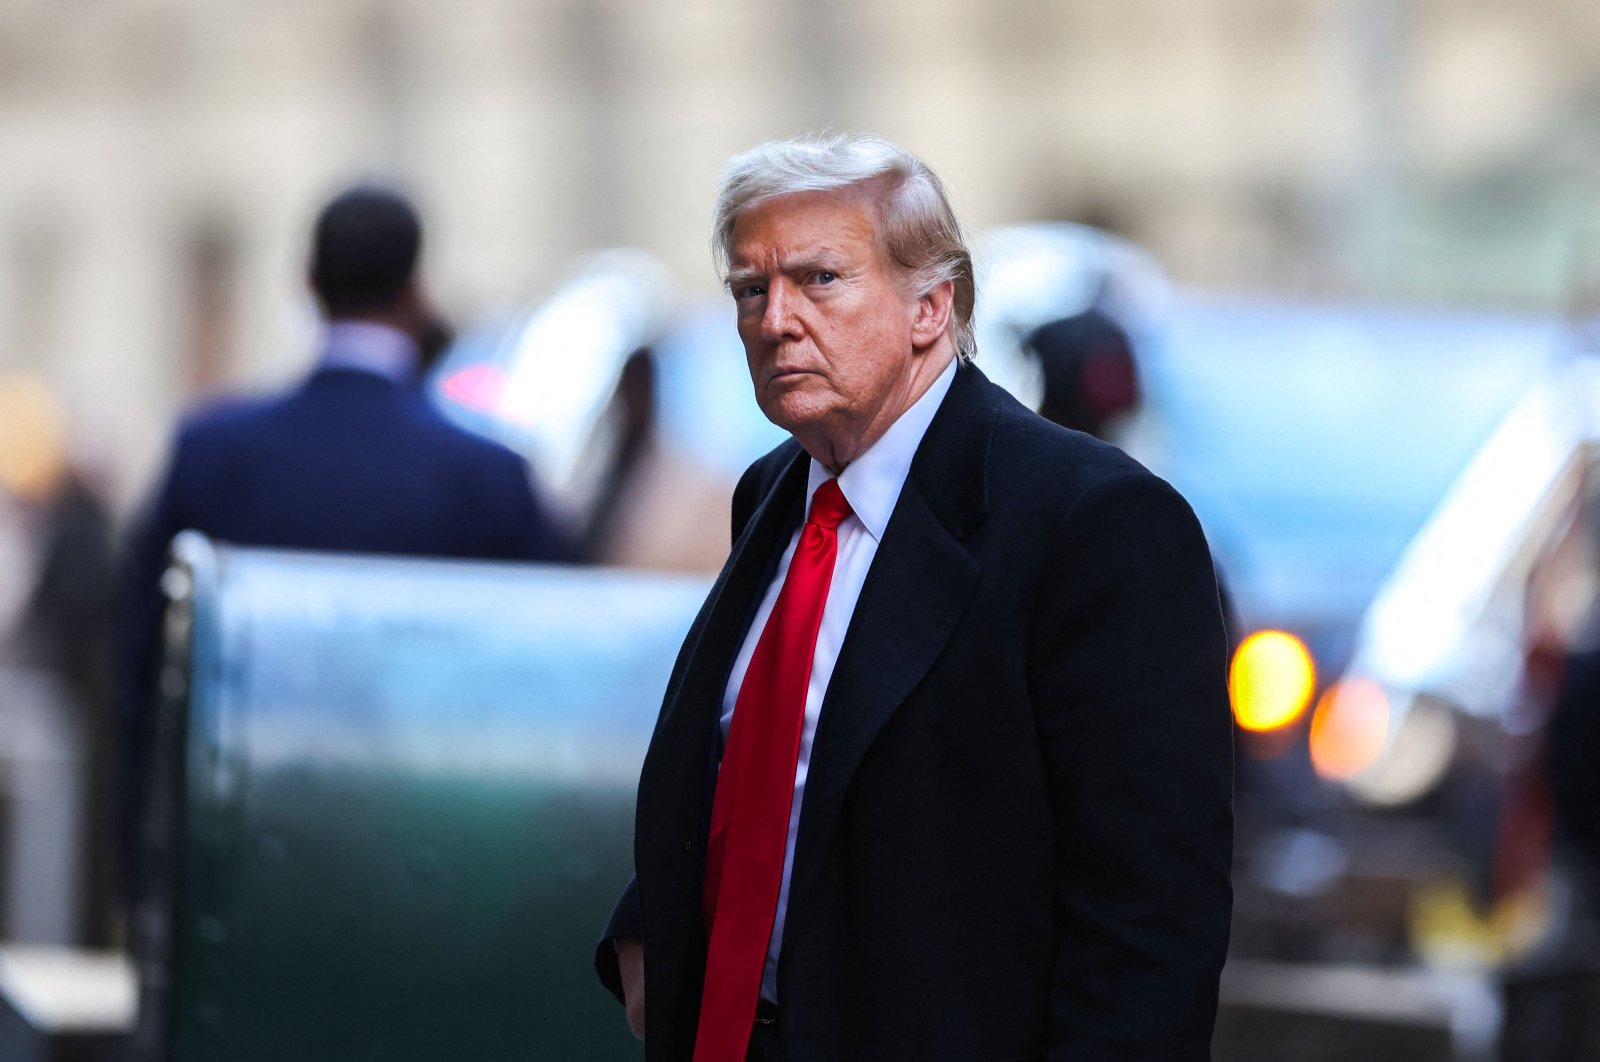 Former U.S. President Donald Trump arrives at 40 Wall Street after his court hearing to determine the date of his trial for allegedly covering up hush money payments linked to extramarital affairs, New York City, U.S., March 25, 2024. (AFP Photo)